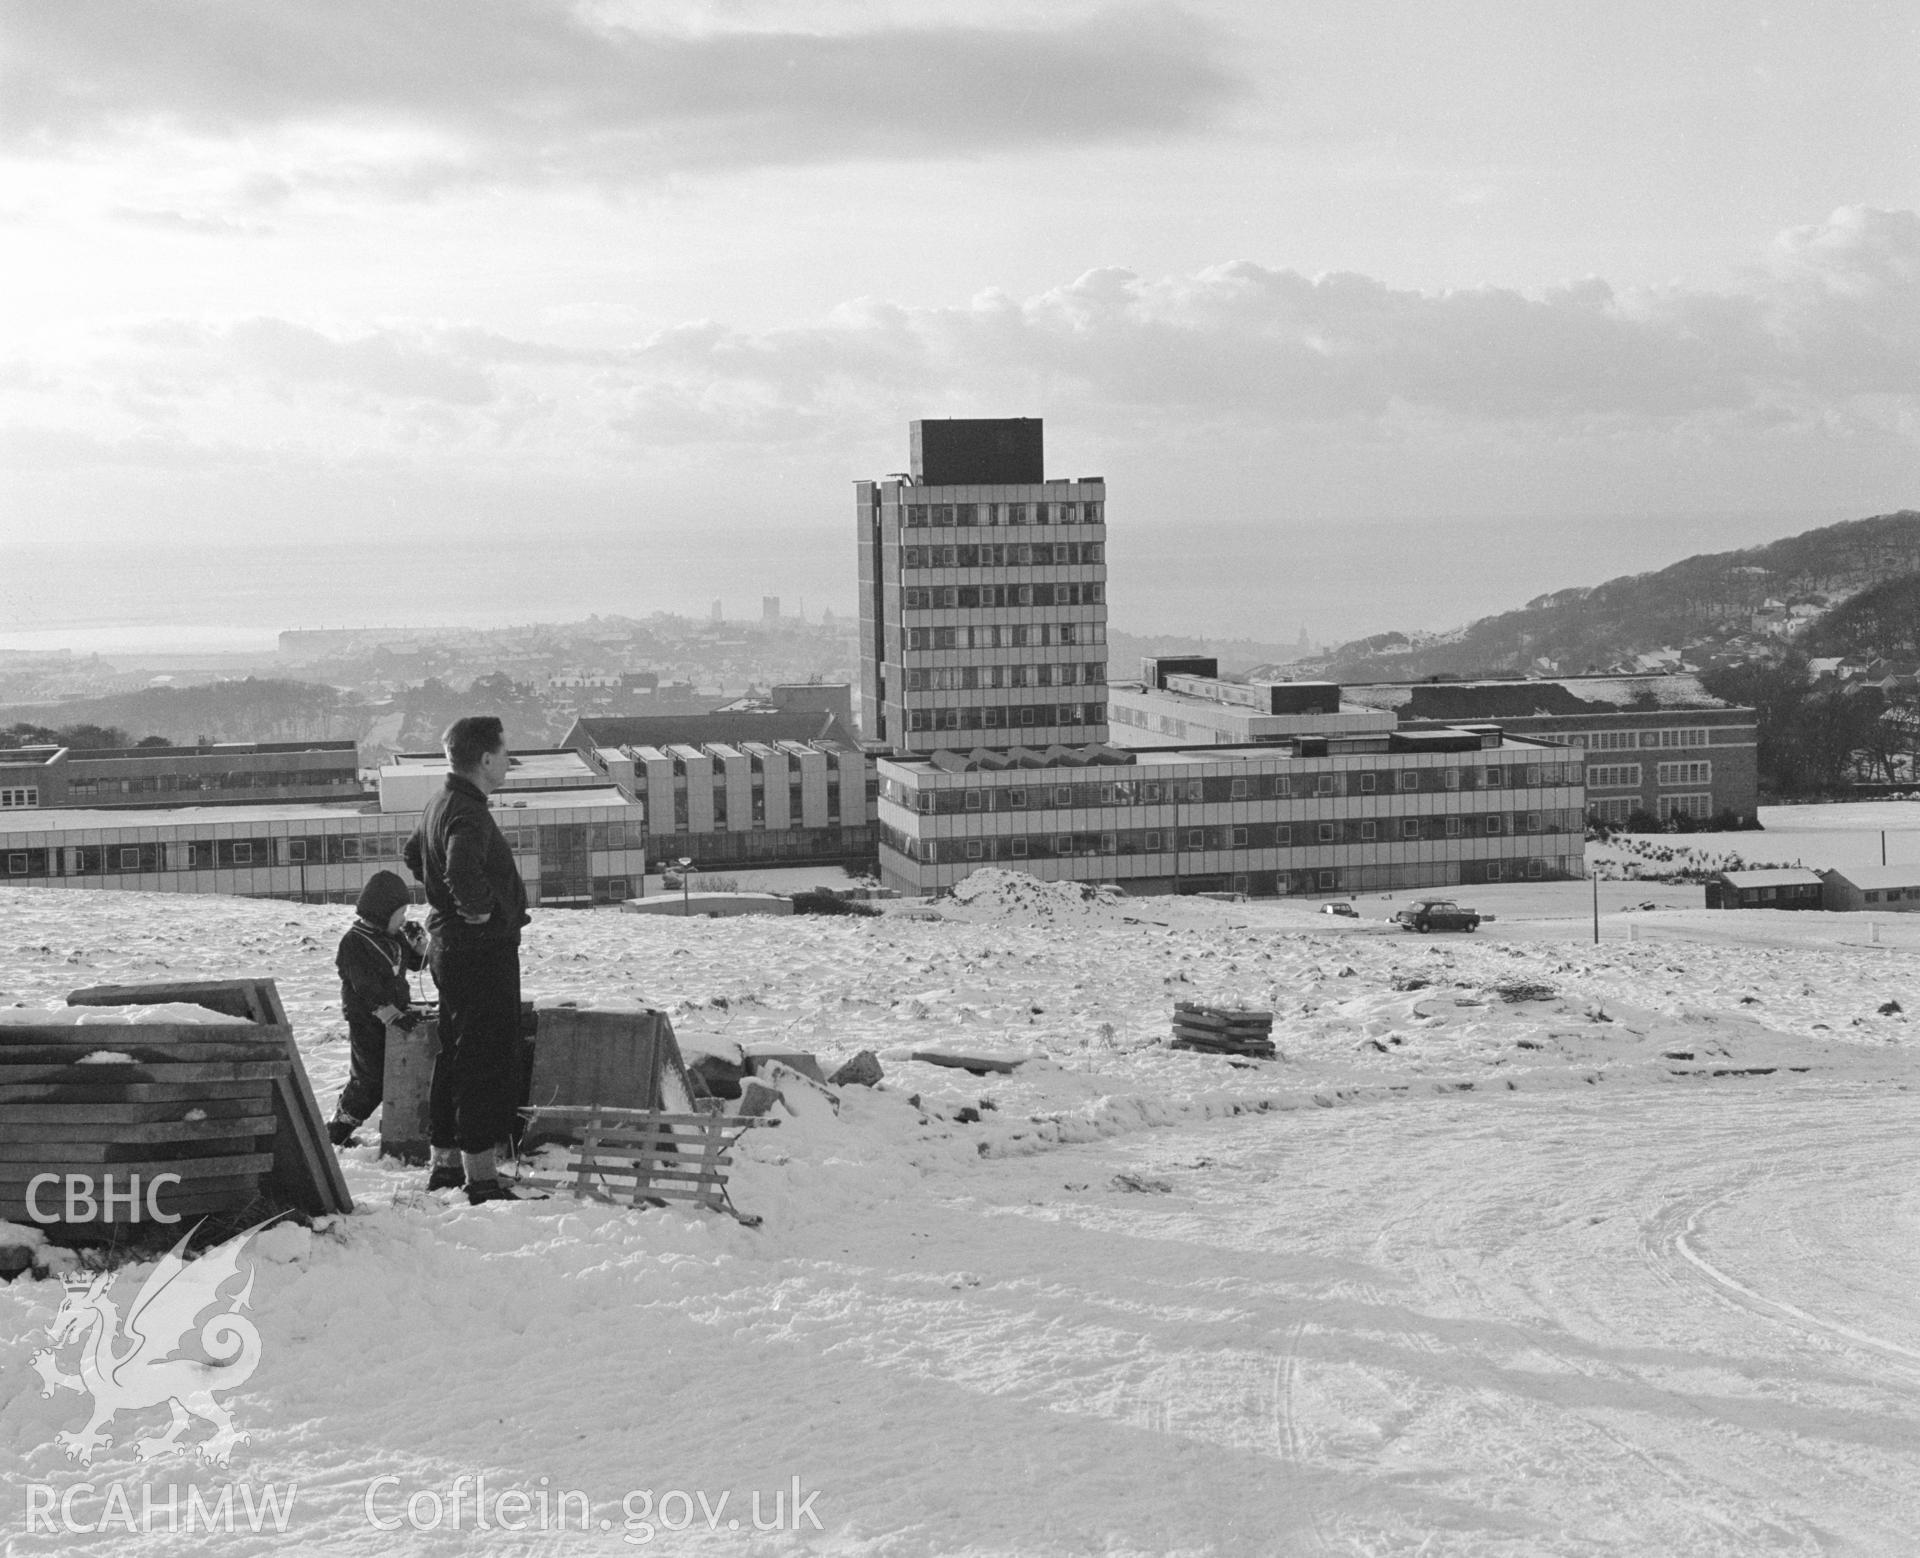 View of University of Aberystwyth in snow from Peter Henley Collection.